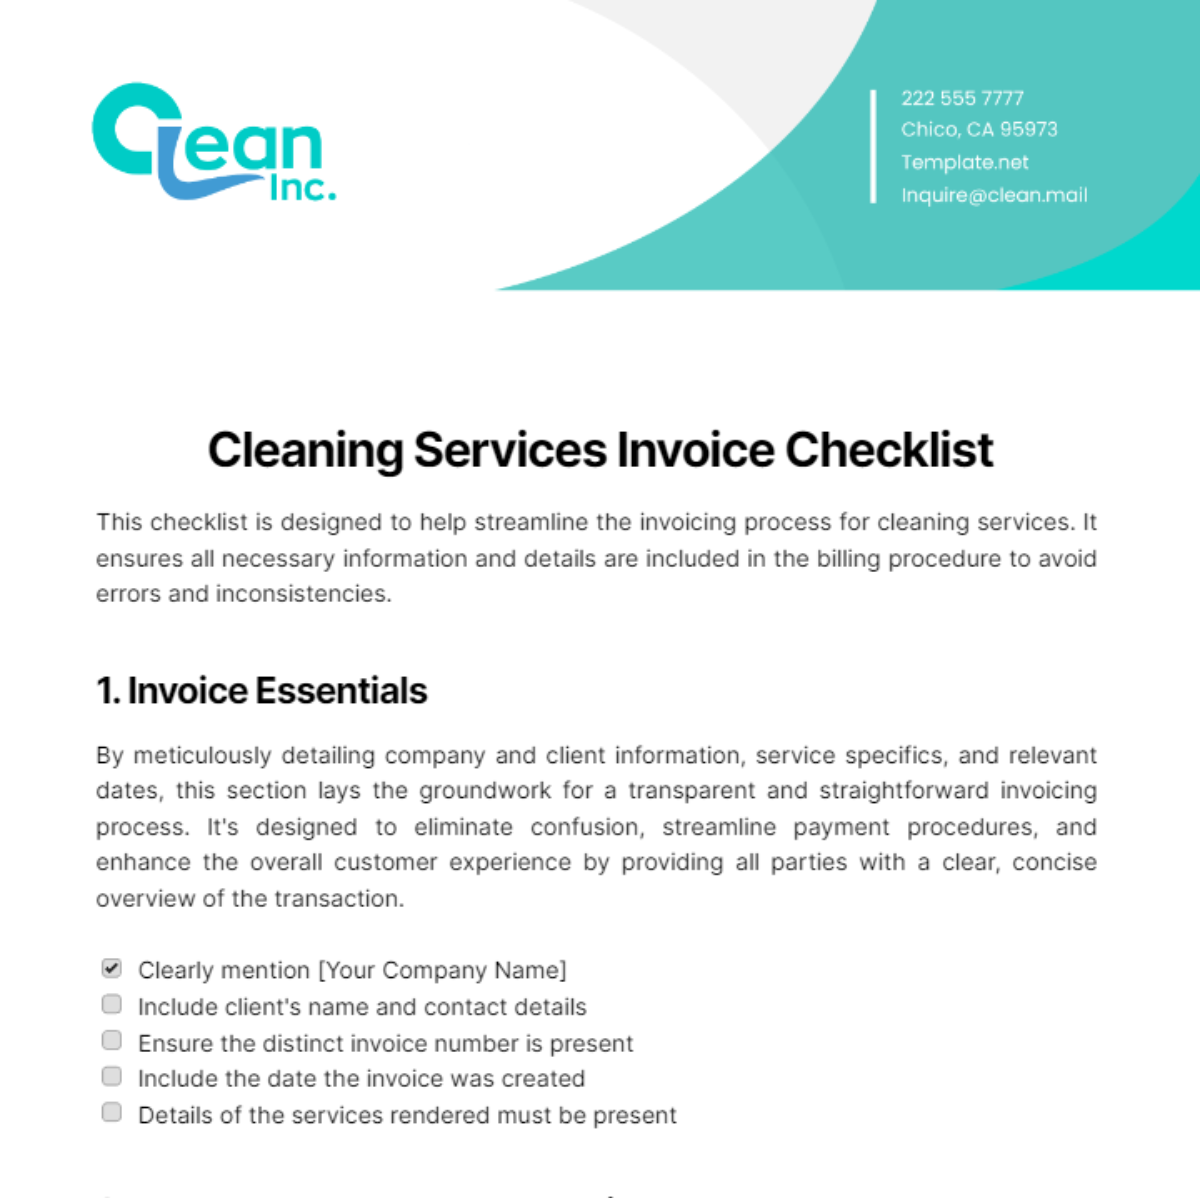 Cleaning Services Invoice Checklist Template